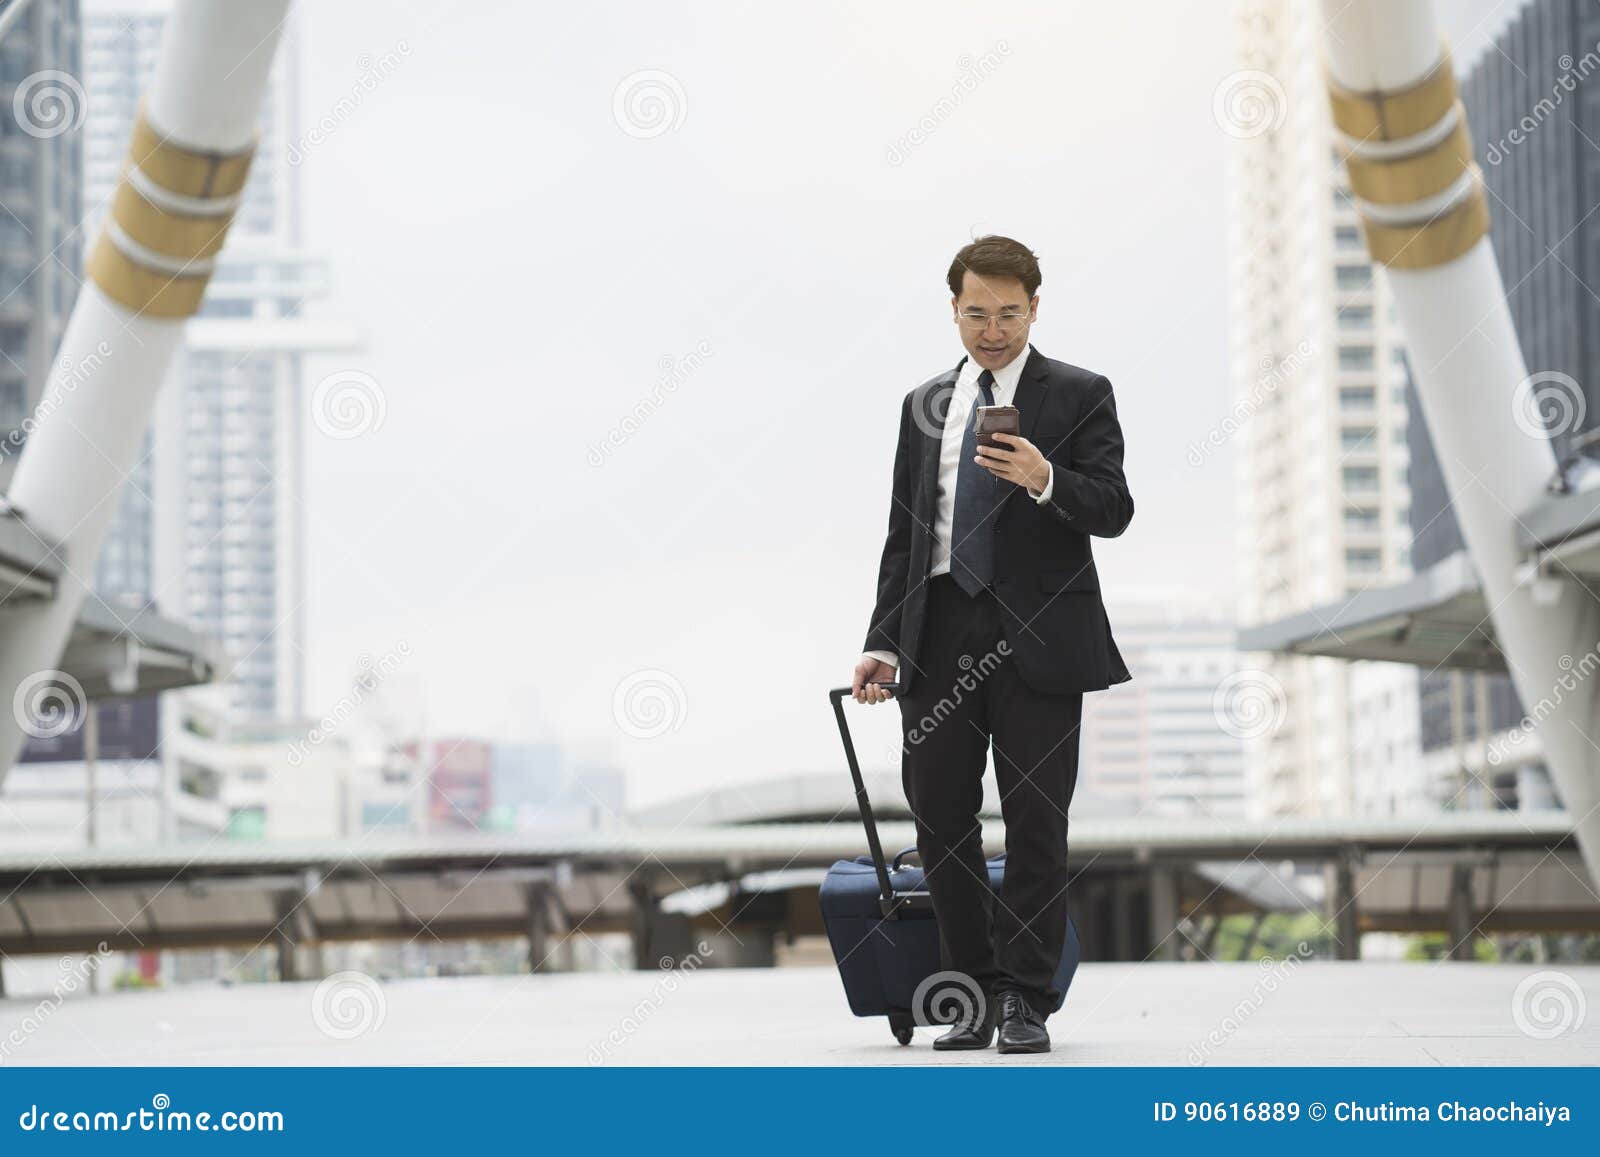 a businessman travels more expensive than a tourist